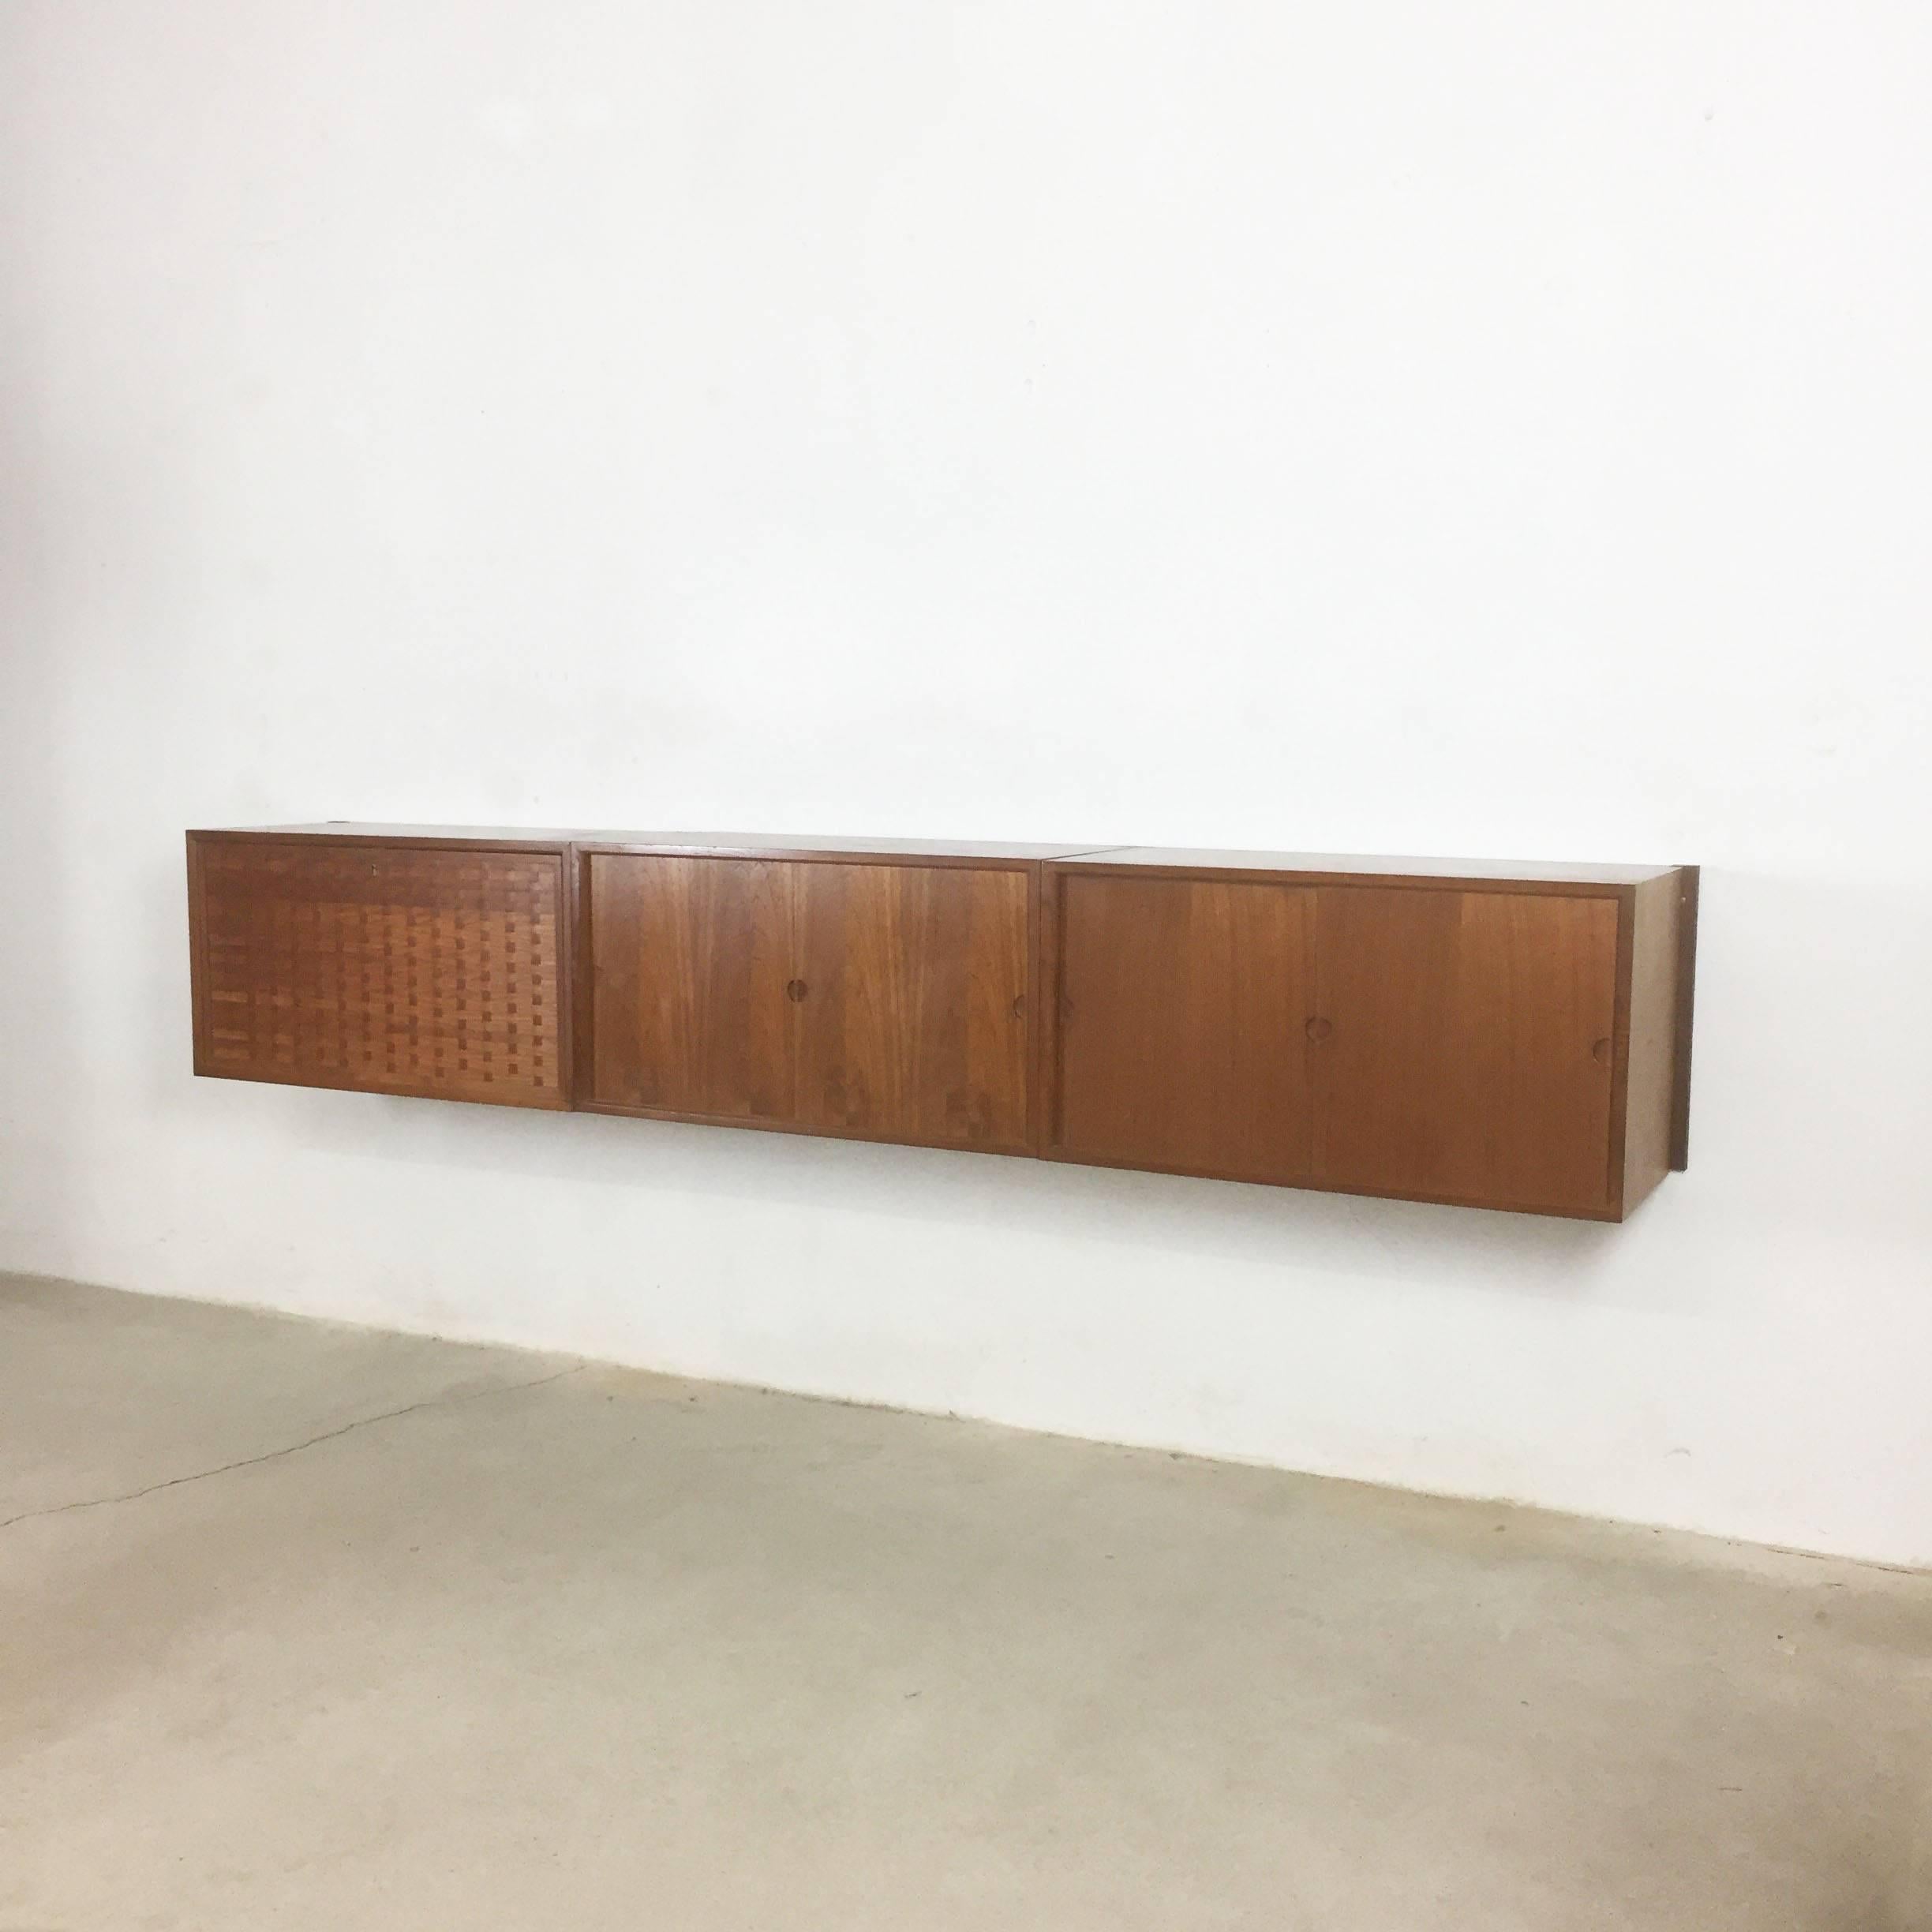 Original Danish wall unit designed by Poul Cadovius in the 1950s for Cado, Denmark. This listed unit was produced by Cado in Denmark in the 1960s. This unit consists of three cabinet elements hanging on four wooden teak wall holder. Two elements are